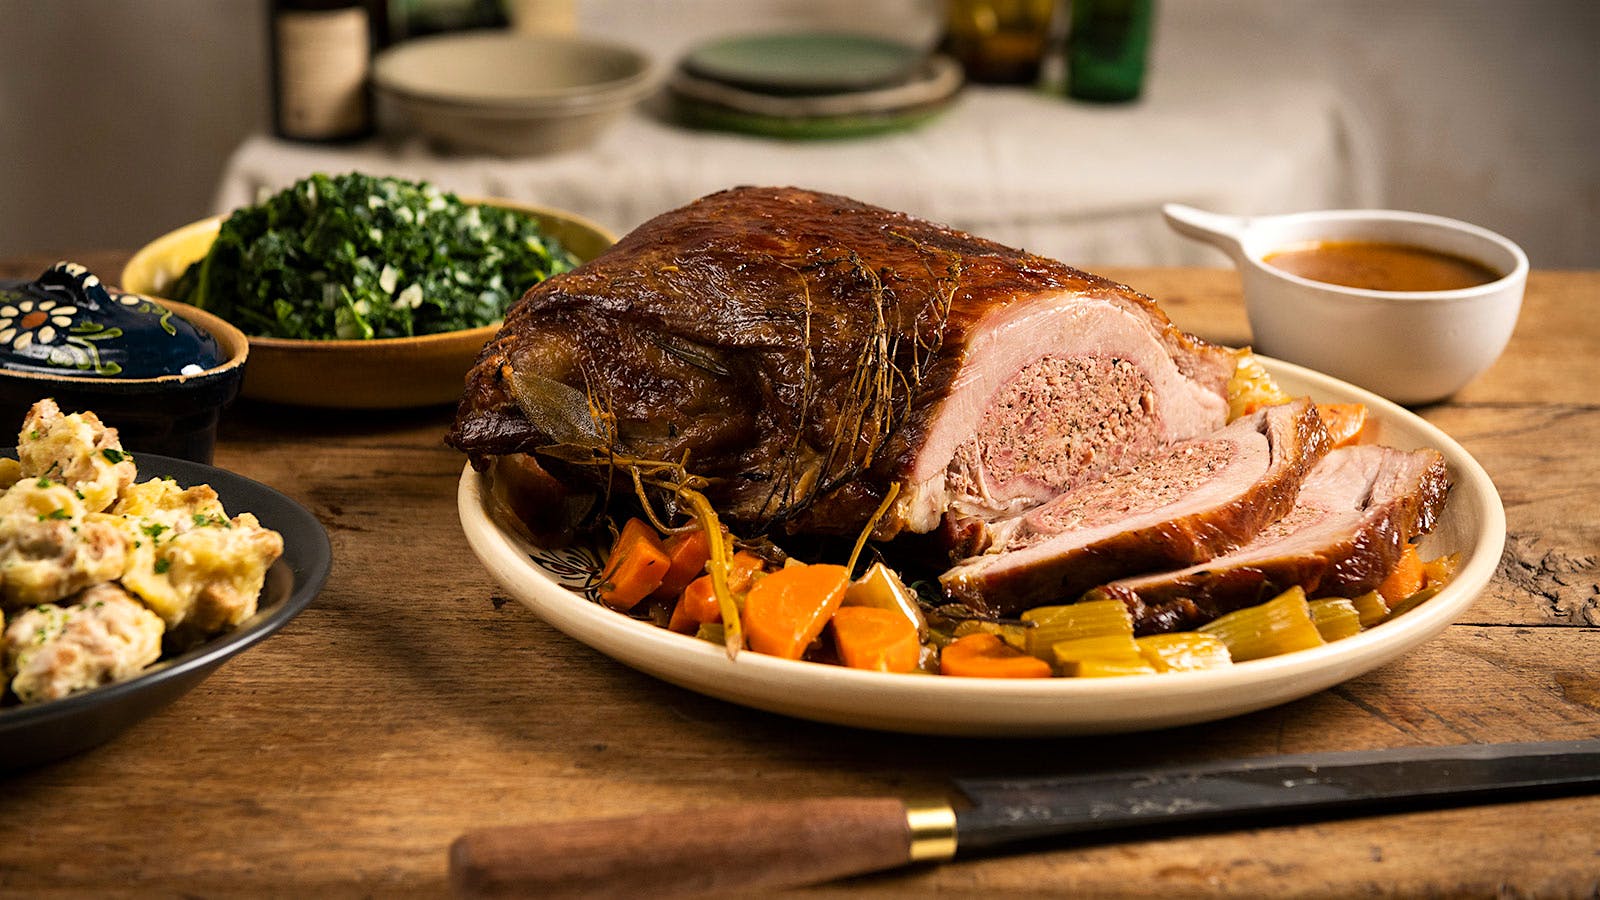 This Thanksgiving, Skip the Turkey for Gabriel Kreuther’s Stuffed Veal